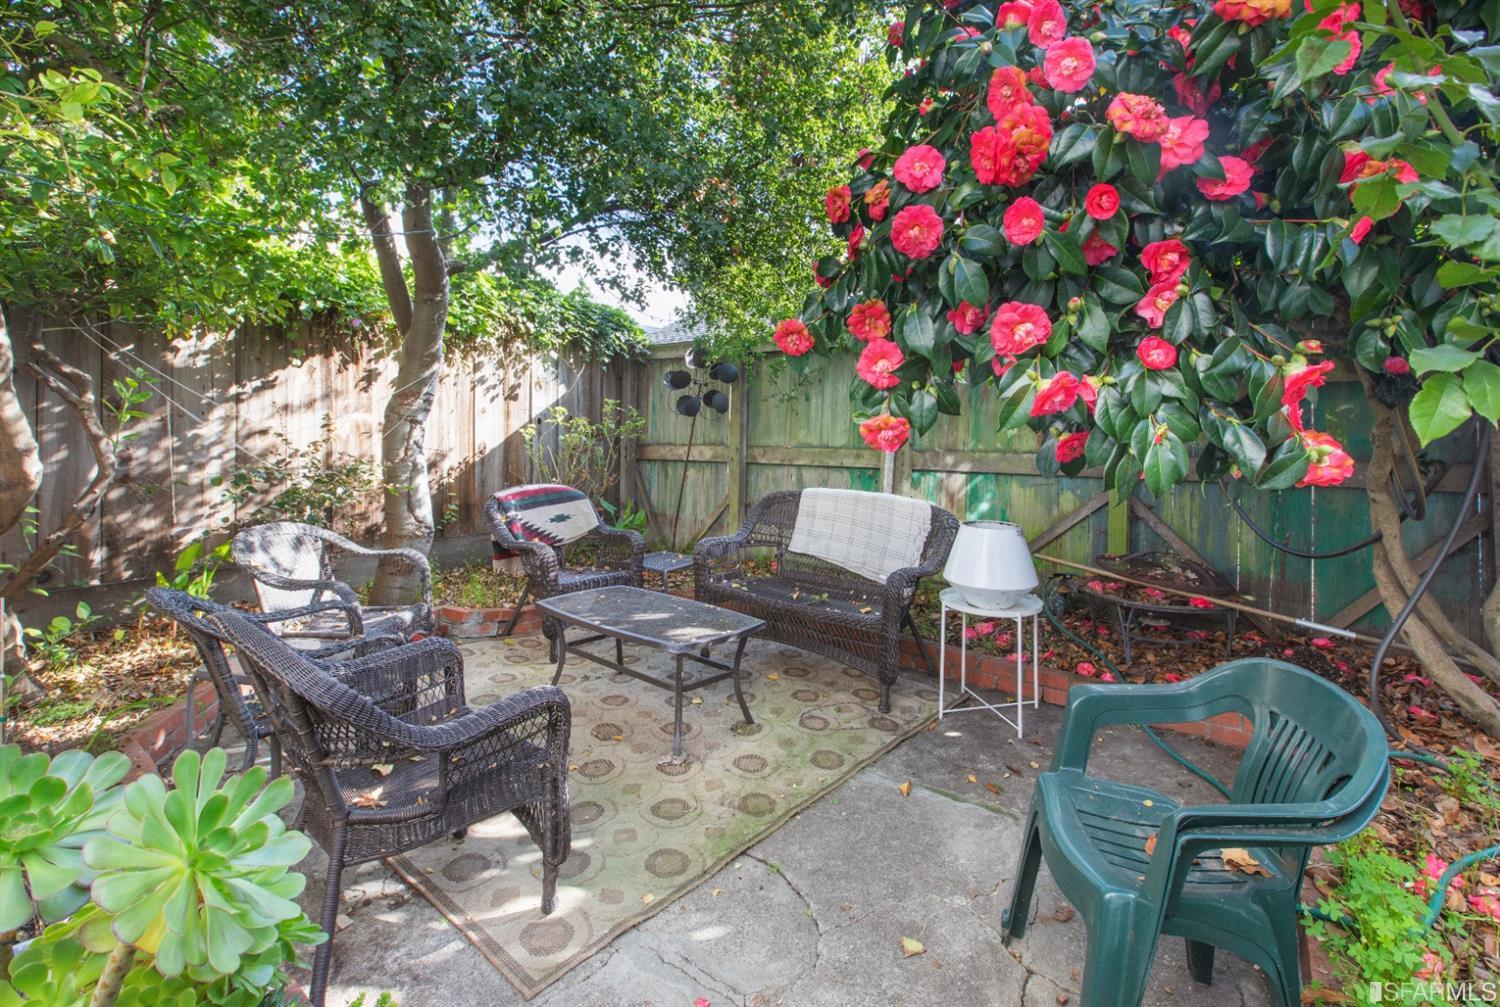 a backyard of a house with table and chairs and potted plants